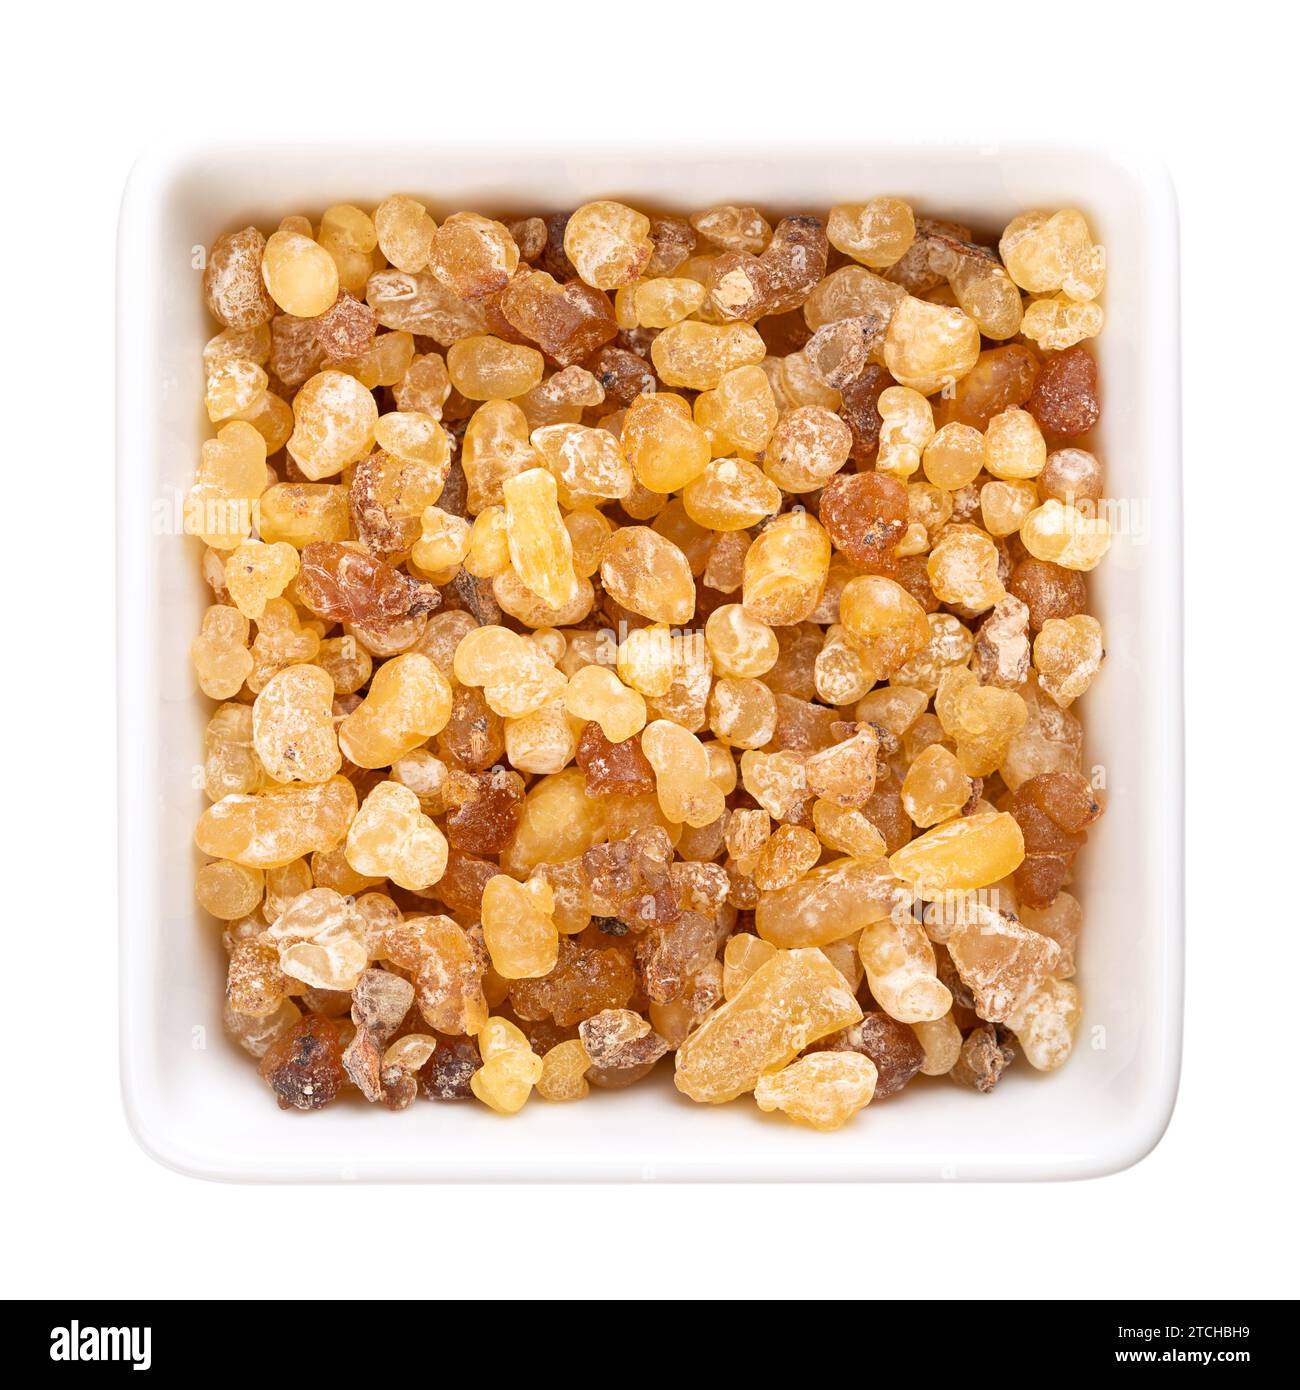 Frankincense resin in a white bowl. Small pieces of hardened aromatic olibanum resin, obtained from trees of the genus Boswellia. Stock Photo